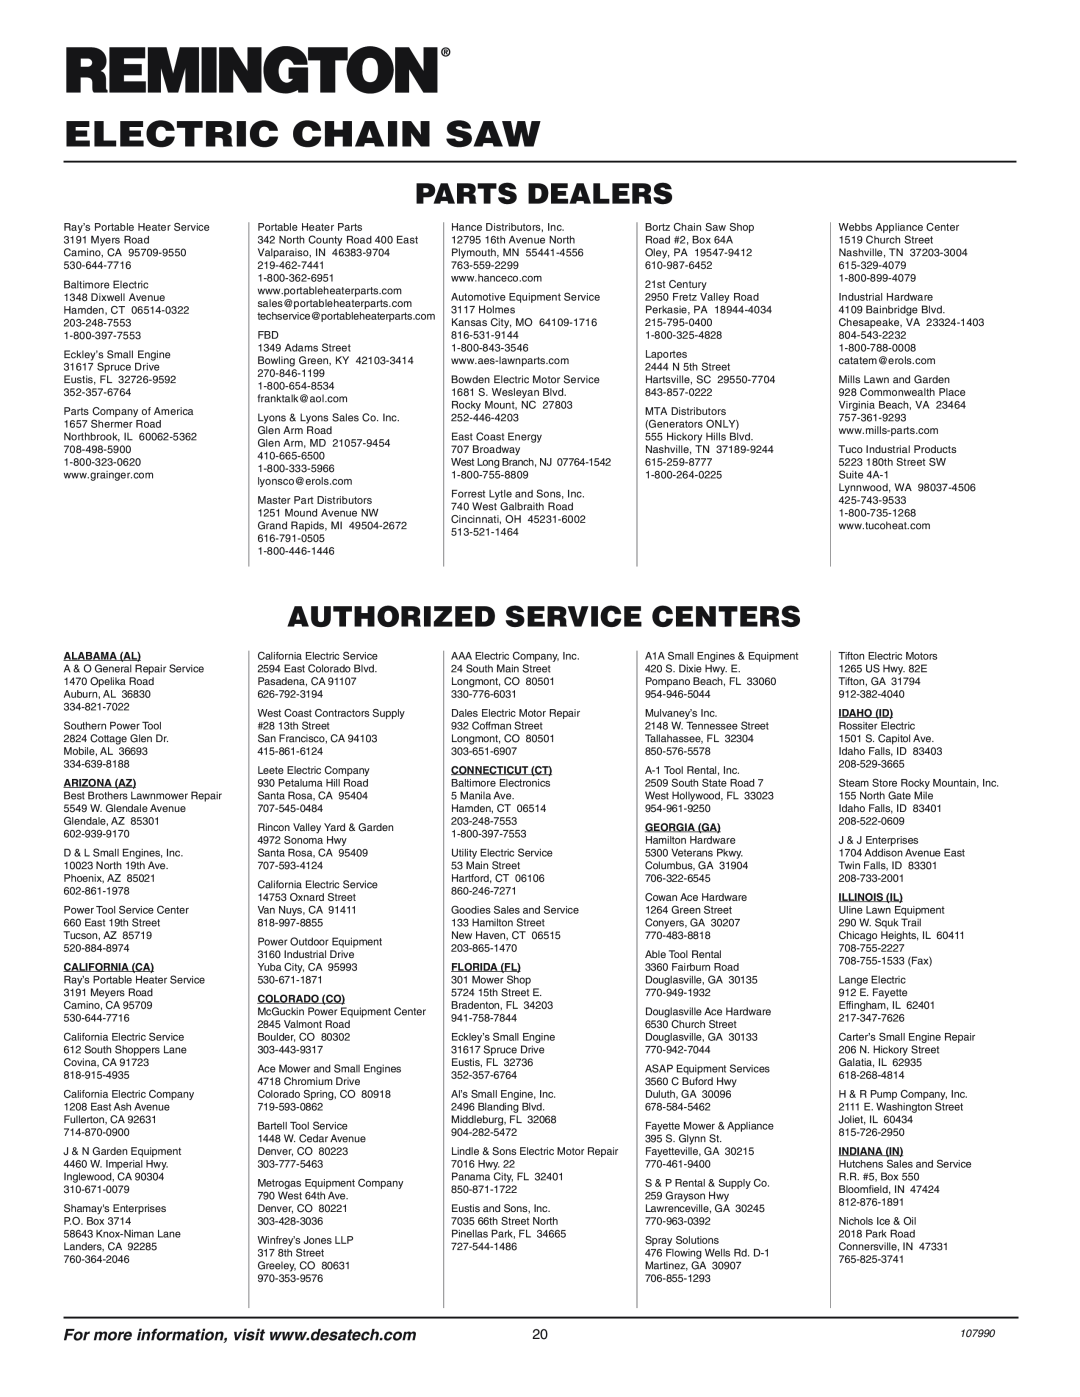 Remington owner manual Parts Dealers, Authorized Service Centers, Electric Chain Saw, 107990 